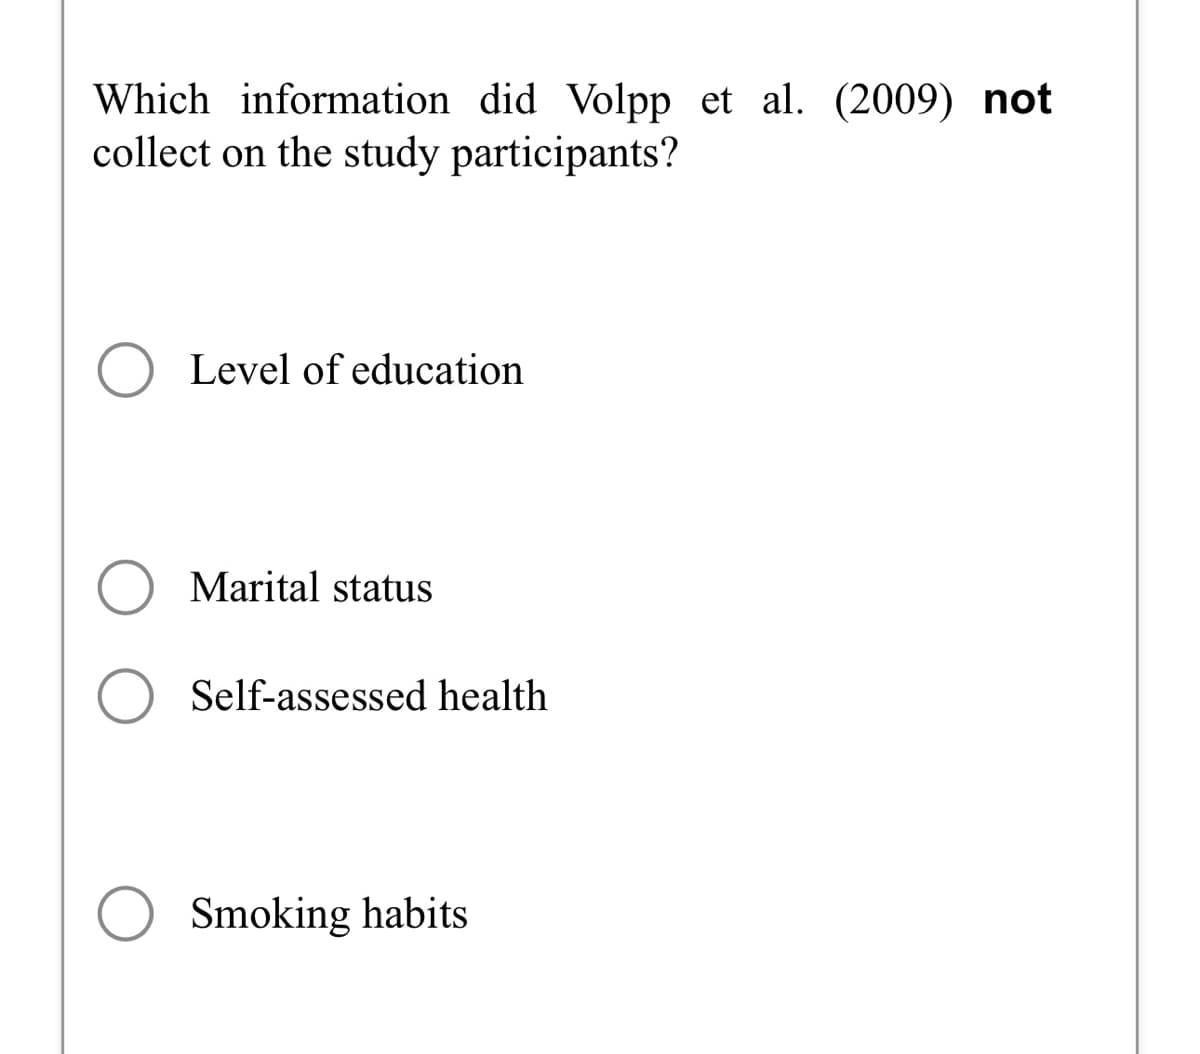 Which information did Volpp et al. (2009) not
collect on the study participants?
O Level of education
Marital status
O Self-assessed health
Smoking habits